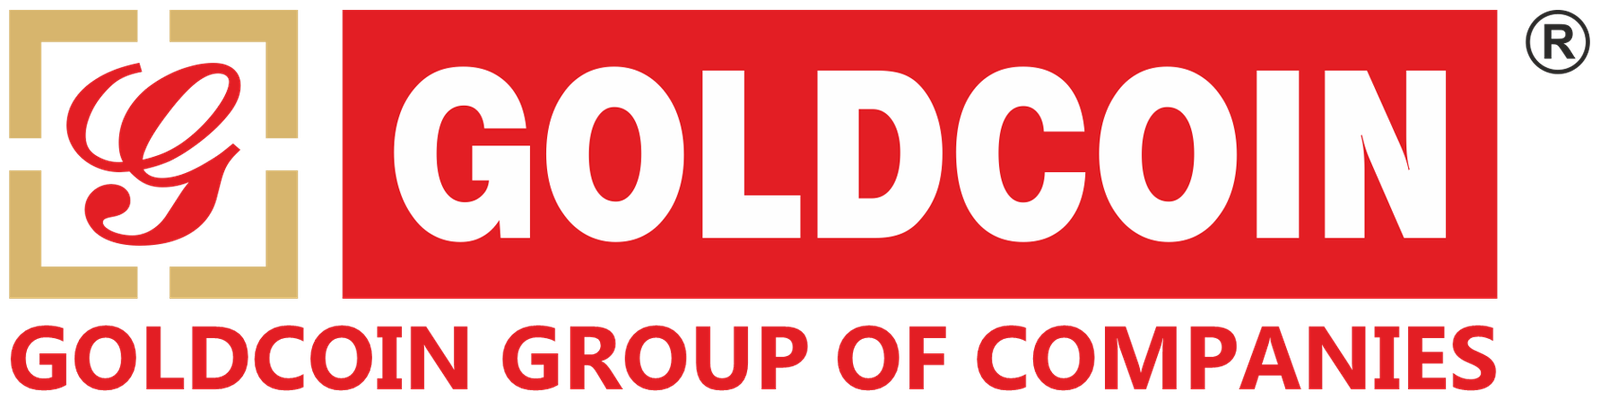 Goldcoin Packaging Corporation - Logo